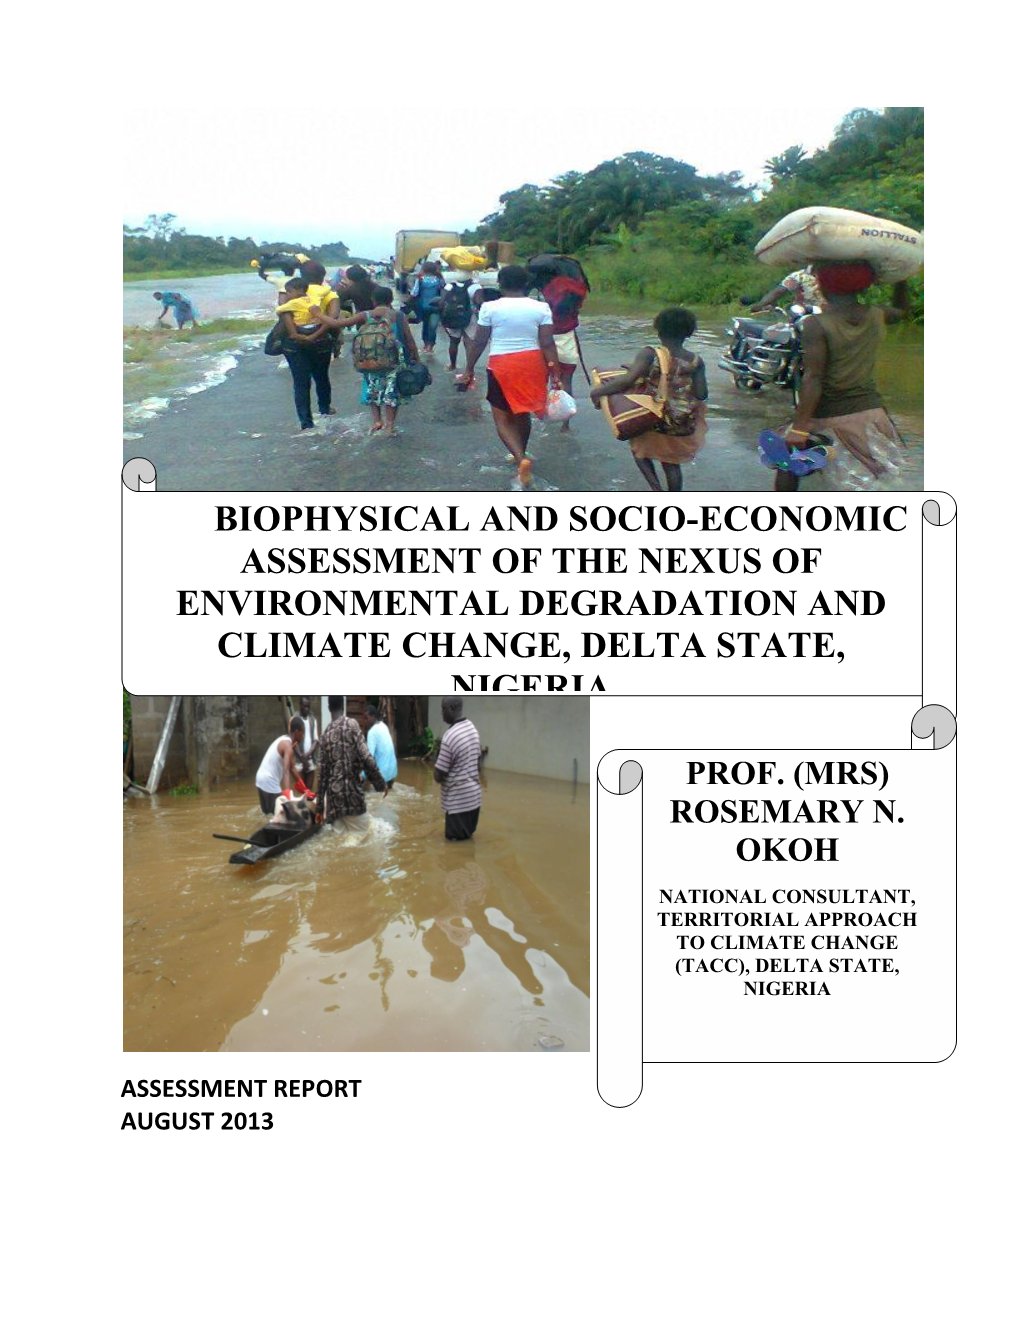 Biophysical and Socio-Economic Assessment of the Nexus of Environmental Degradation and Climate Change, Delta State, Nigeria